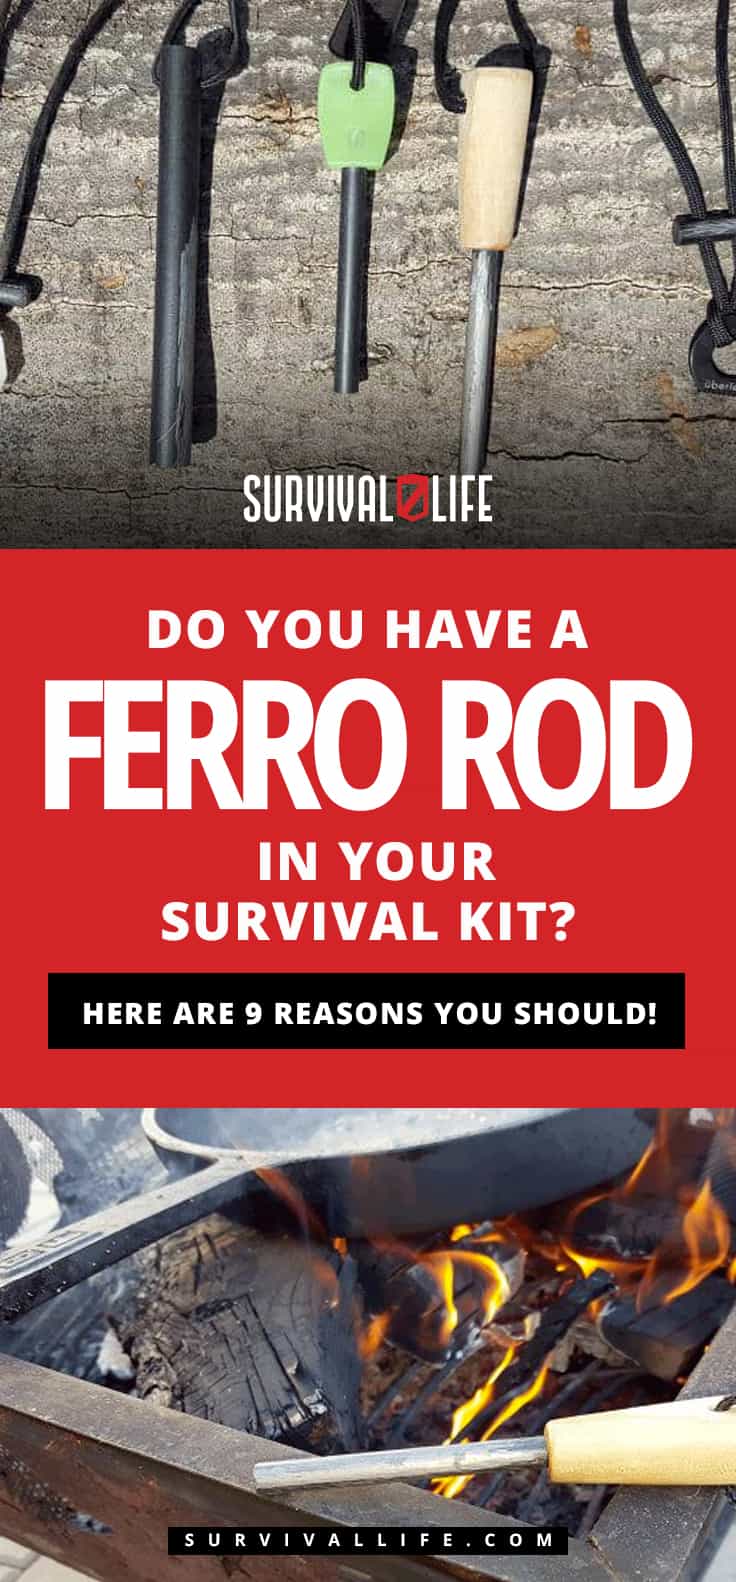 Do You Have A Ferro Rod In Your Survival Kit? Here Are 9 Reasons You Should!